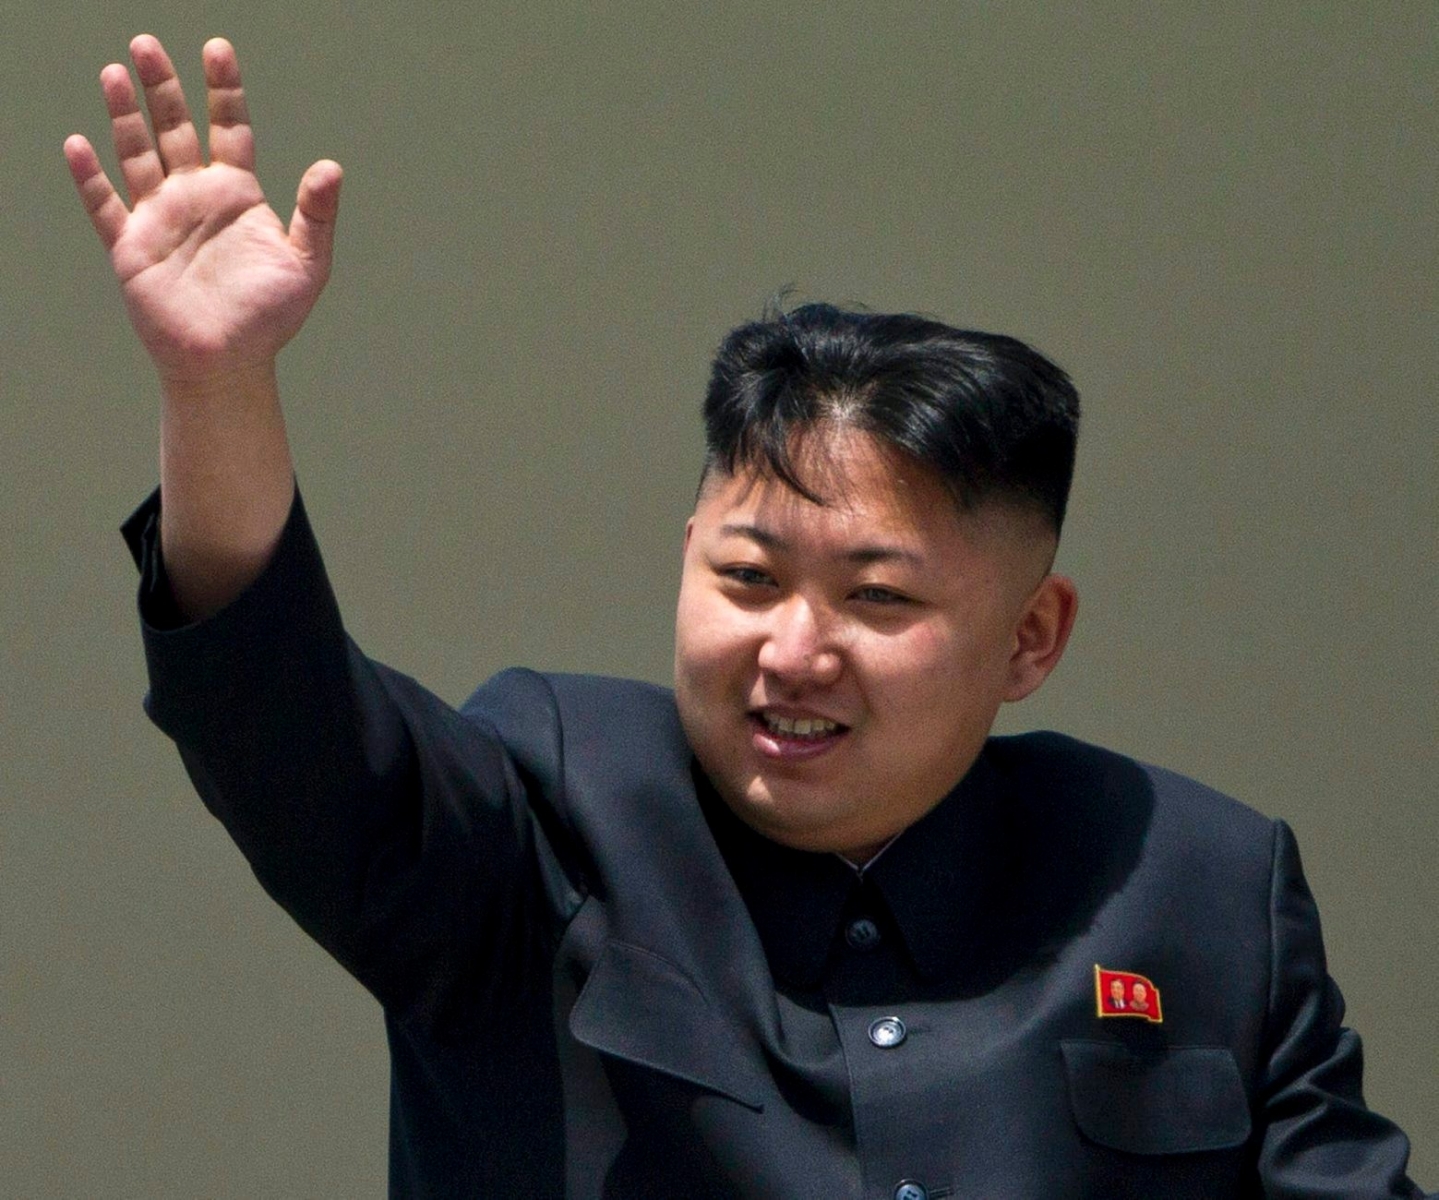 FILE - In this Sunday, April 15, 2012 file photo, North Korean leader Kim Jong Un waves from a balcony at the end of a mass military parade in Pyongyang's Kim Il Sung Square. North Korea fired a long-range rocket Wednesday morning in its second launch under its new leader, defying warnings from the U.N. and Washington only days before South Korean presidential elections. (AP Photo/David Guttenfelder, File) North Korea Rocket Launch